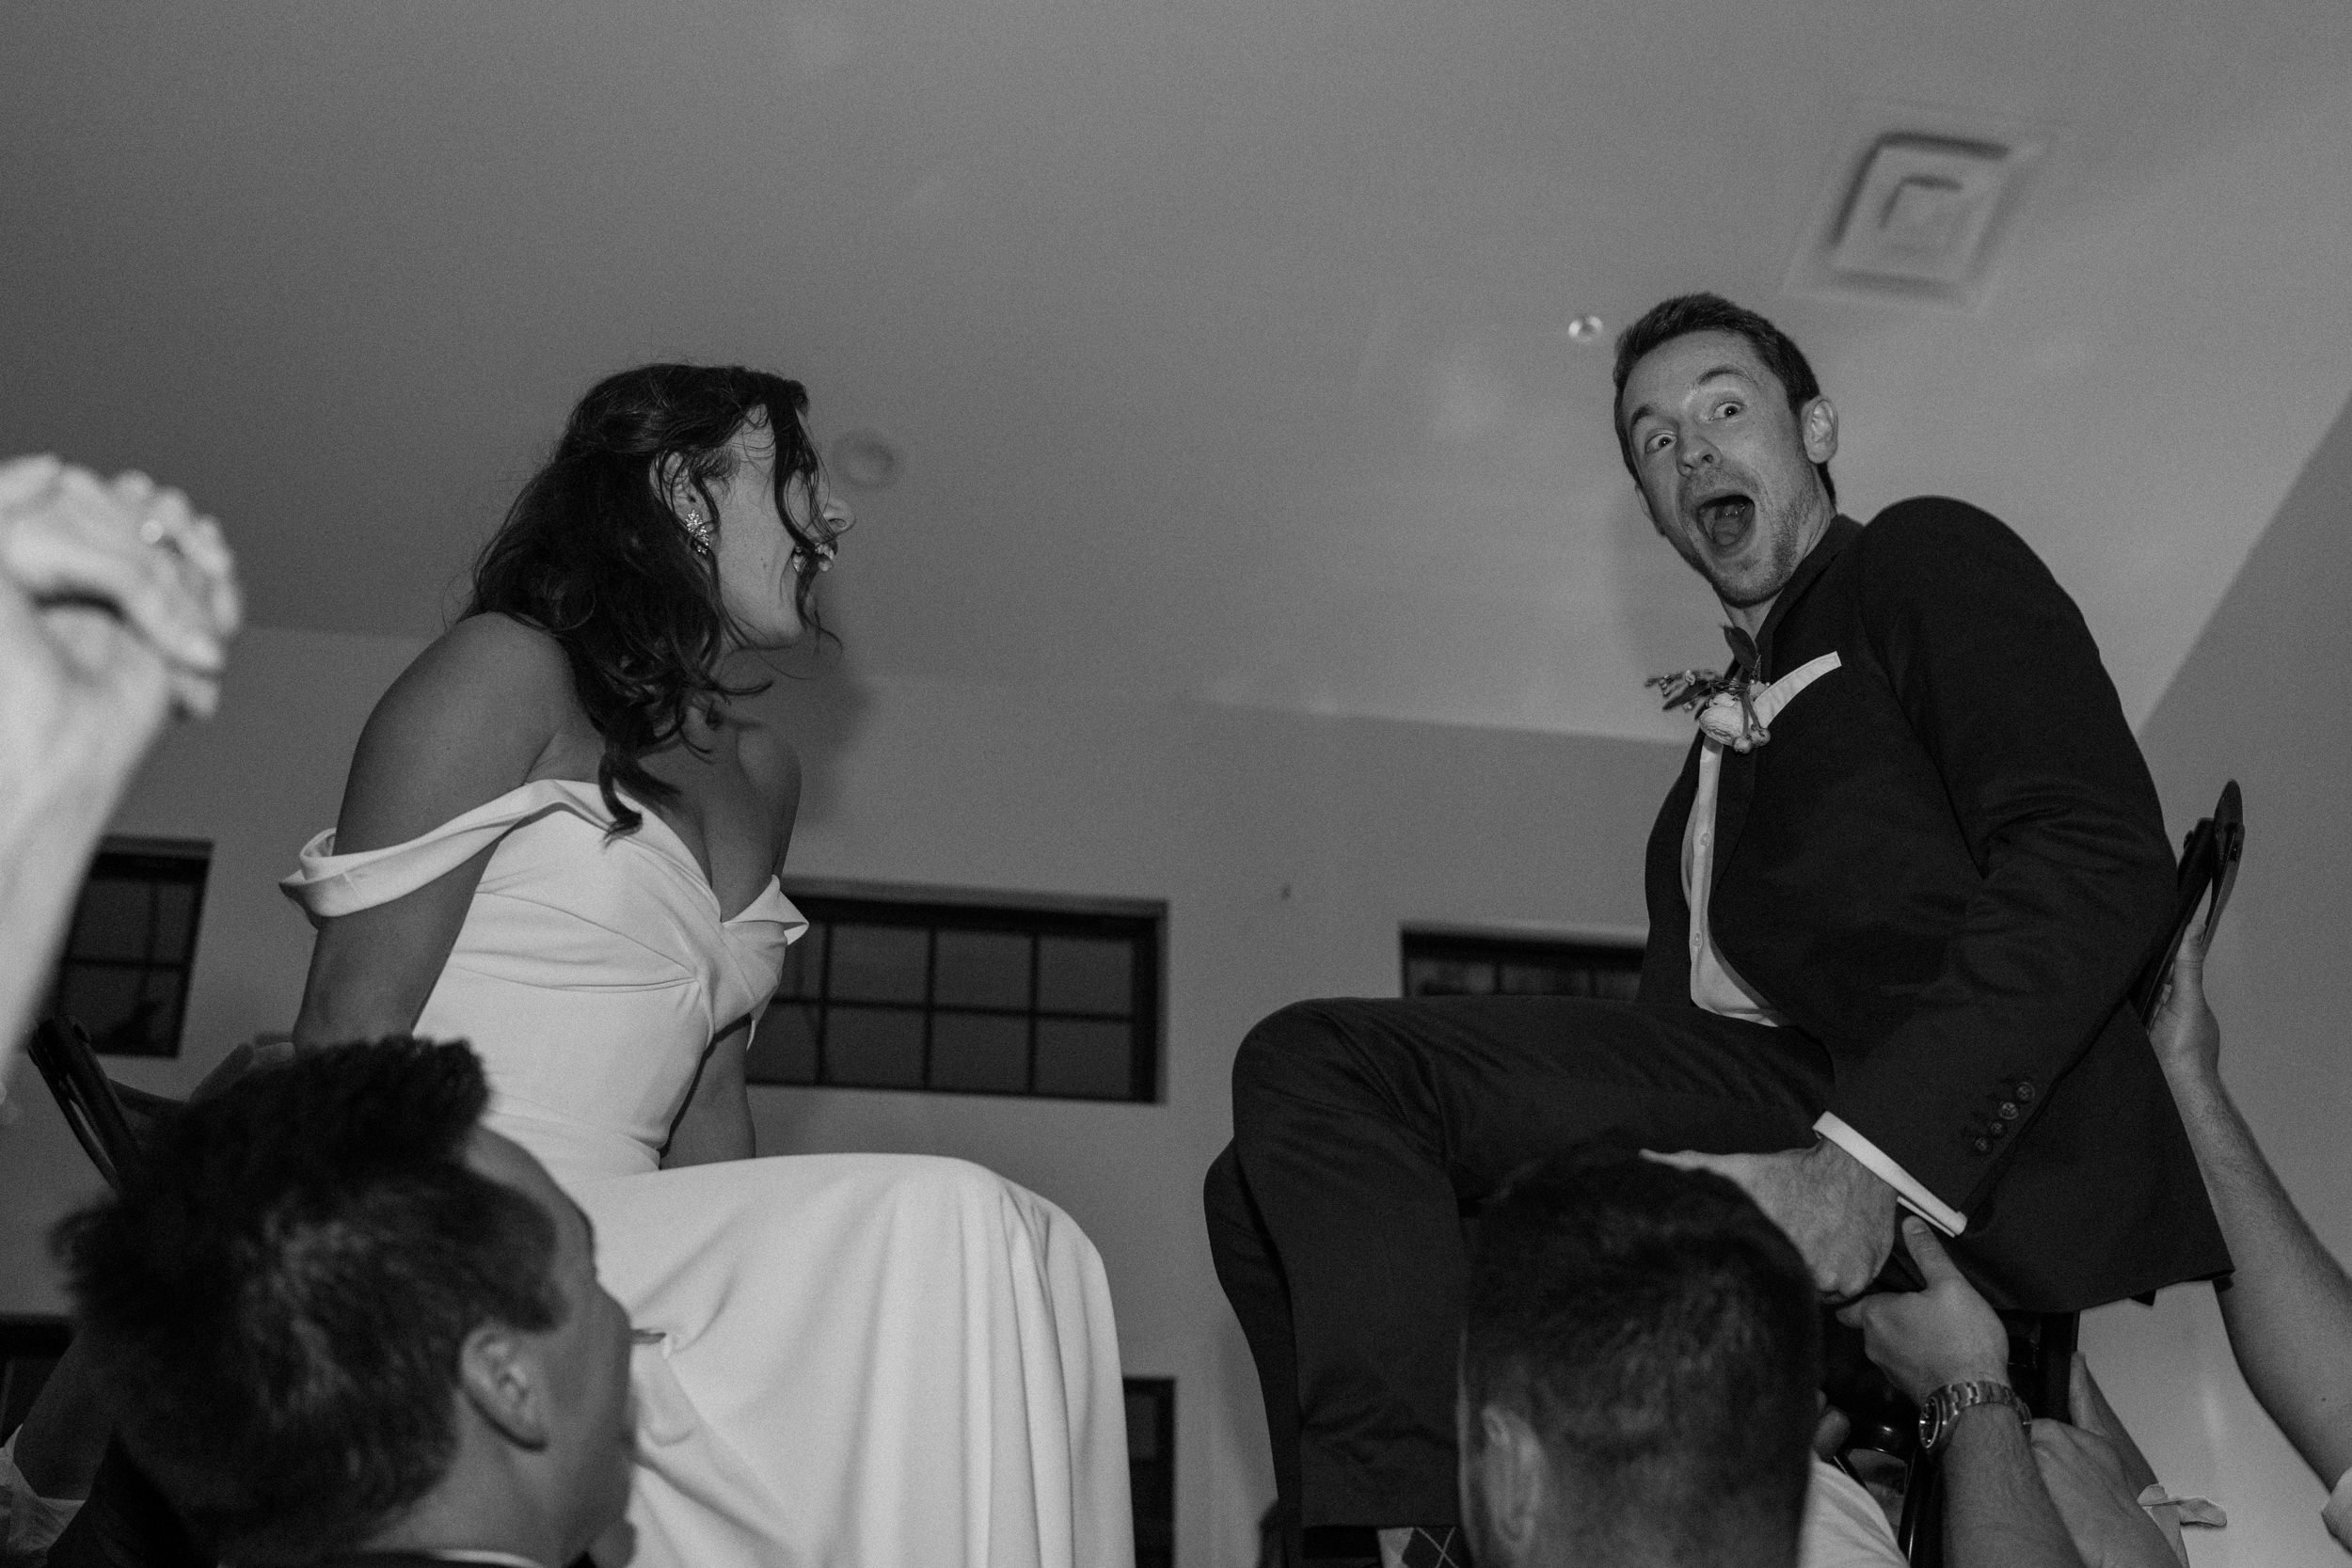 The bride and groom laugh as they are both lifted into the air